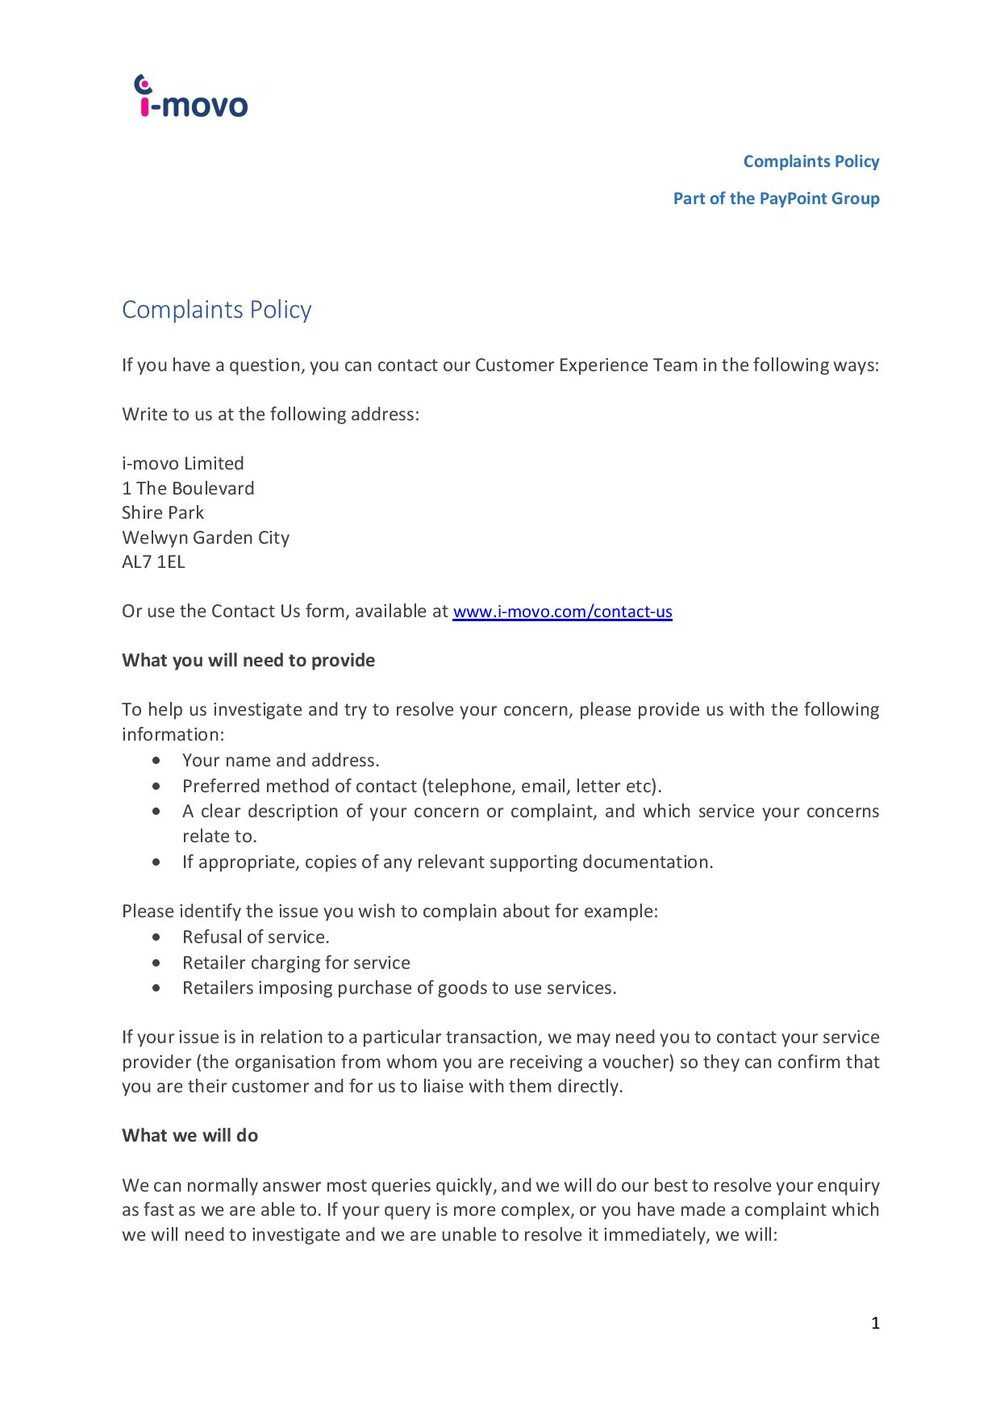 i-movo Complaints Policy - v1.2. 18.12.2020-page-001.jpg